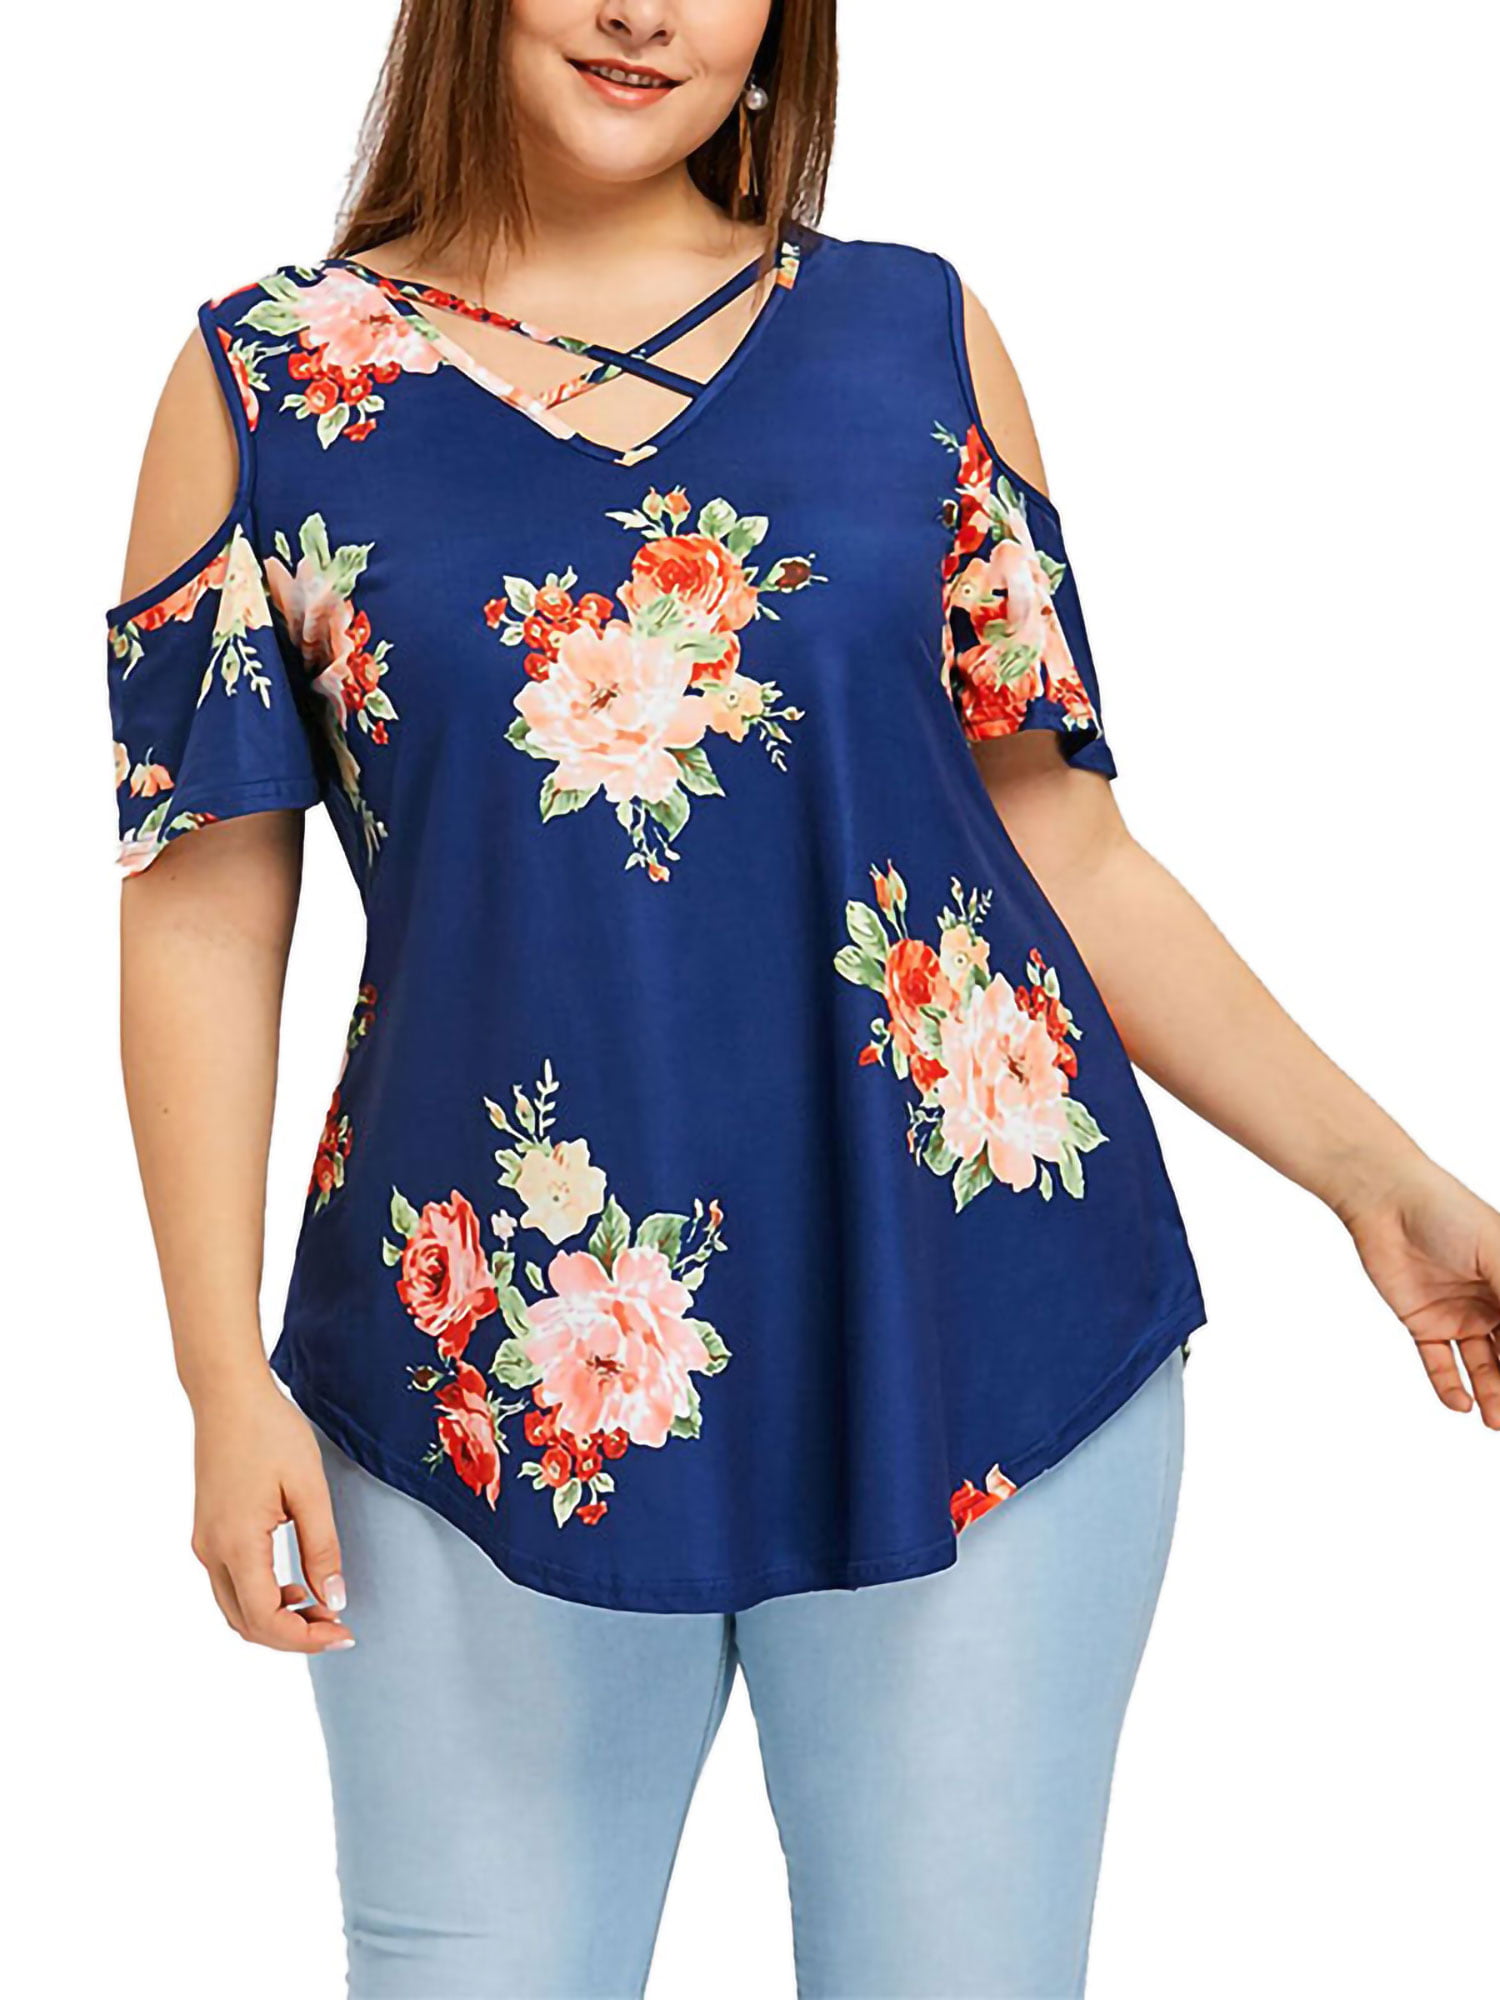 Women Floral Top T-Shirt Ladies Loose Casual Short Sleeve Tunic Blouse Plus Size